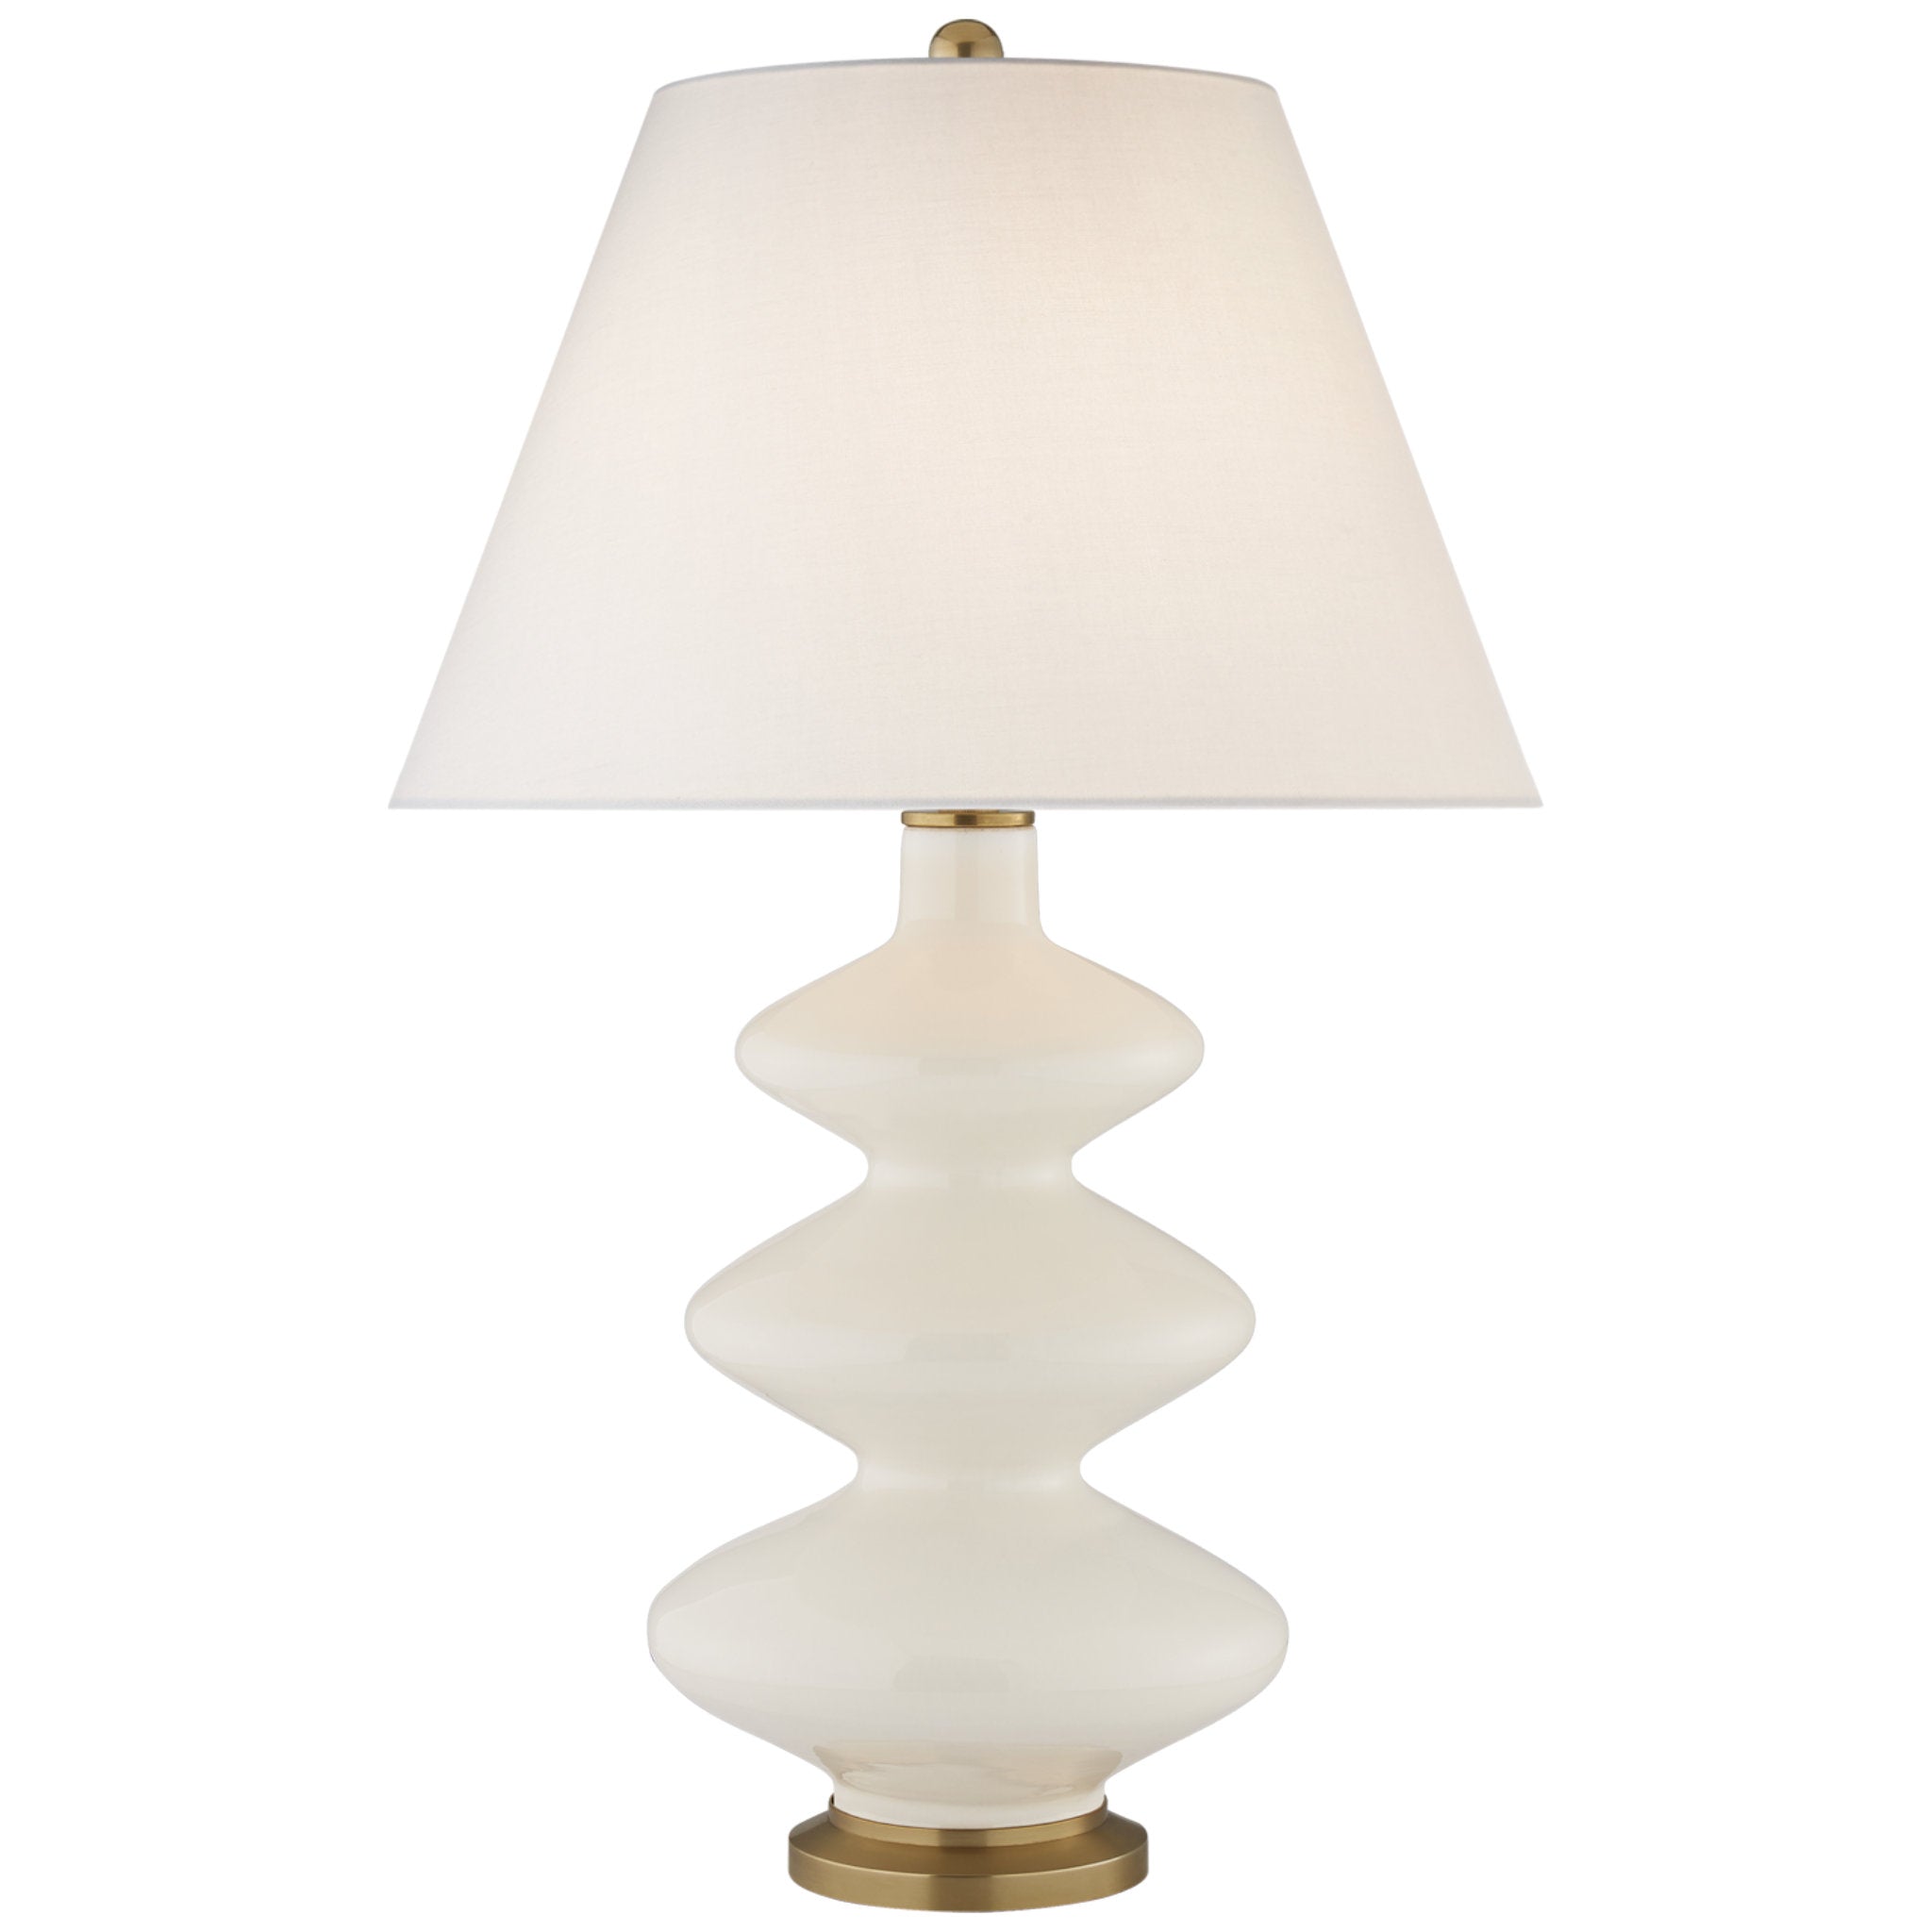 Christopher Spitzmiller Smith Medium Table Lamp in Ivory with Linen Shade